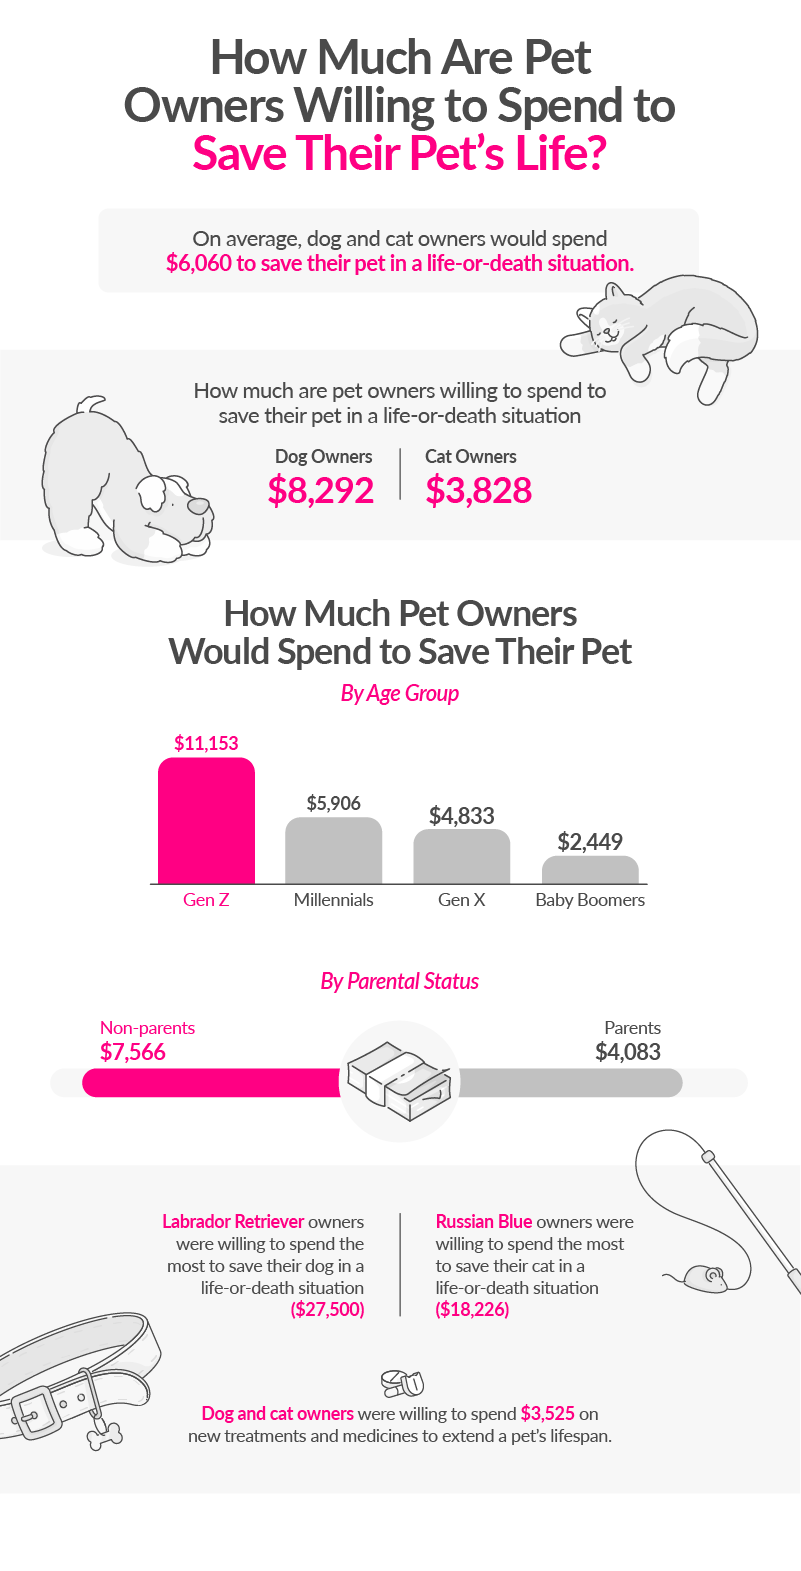 how much are pet owners willing to spend to save their pet's life?